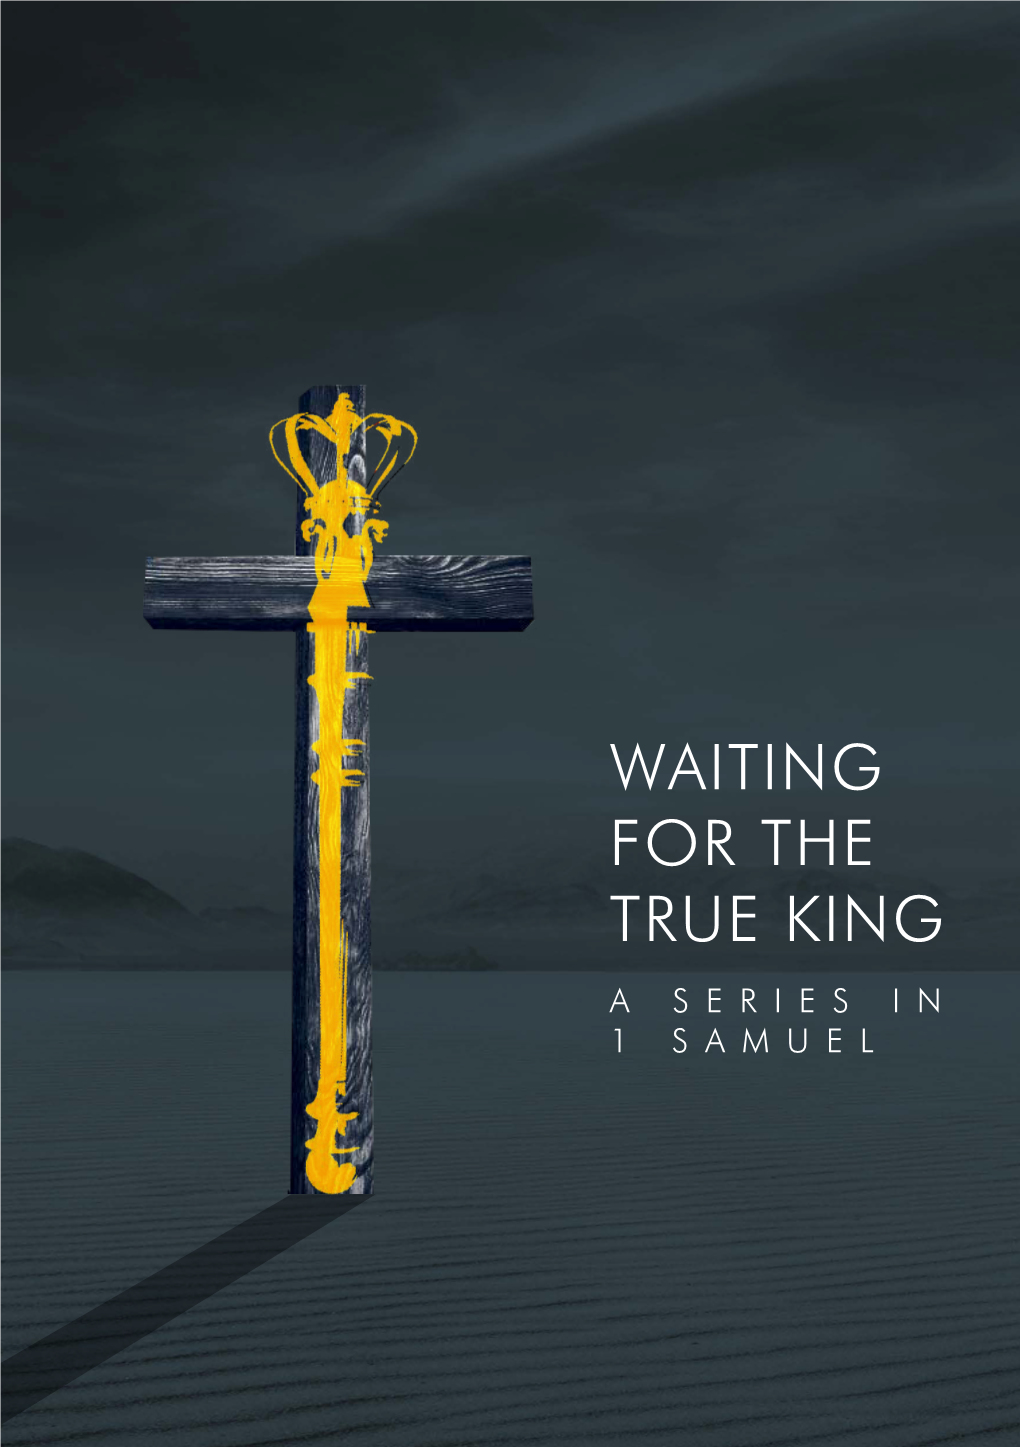 Waiting for the True King a Series in 1 Samuel